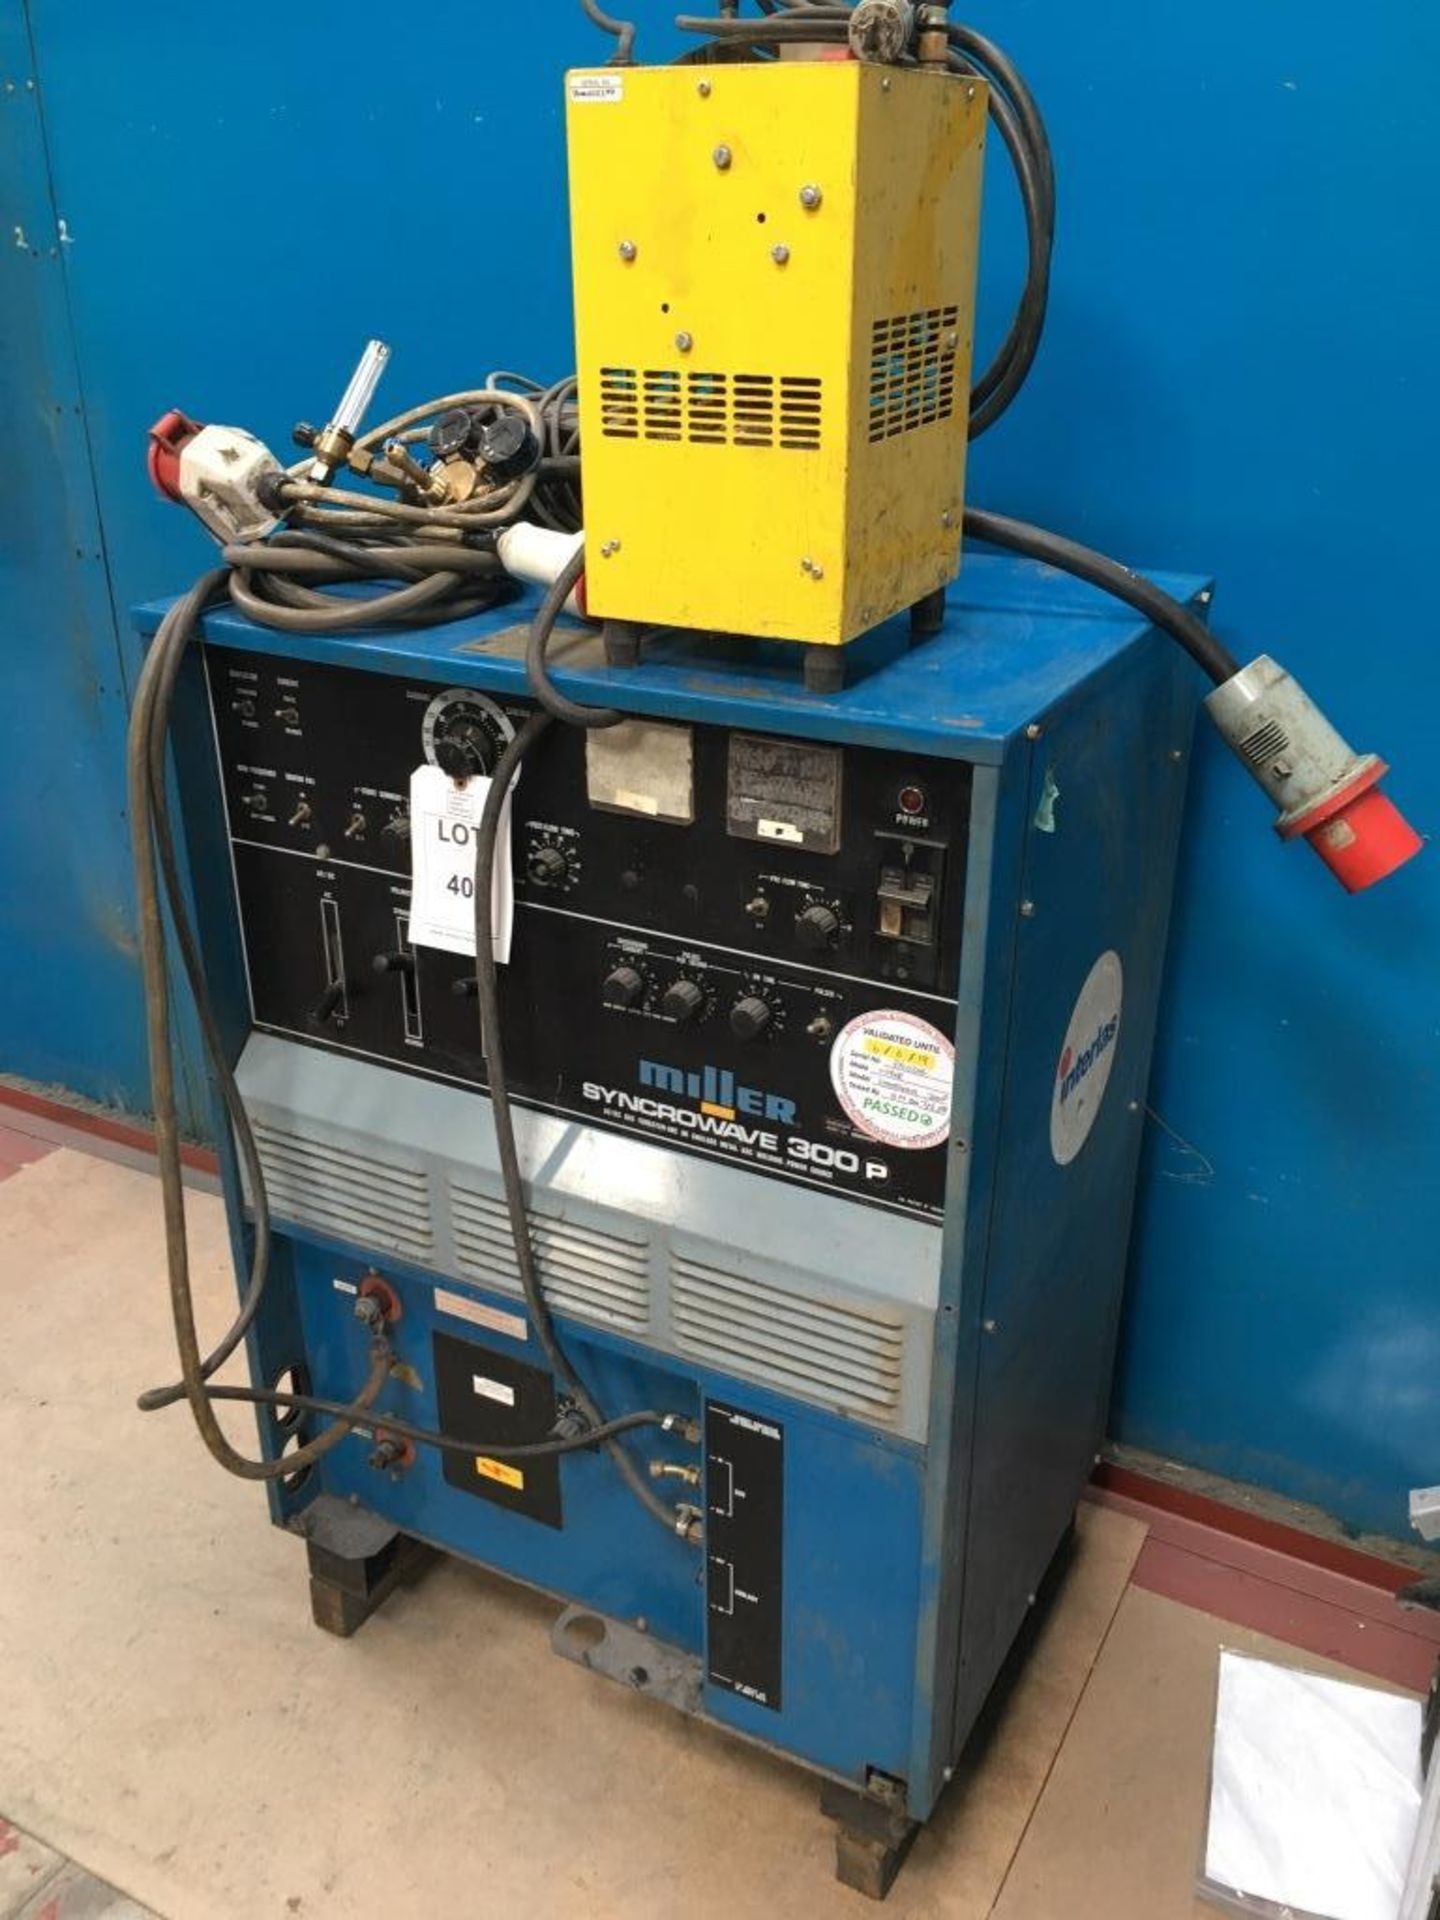 Miller Syncrowave 300P AC/DC tig welder, Serial no. RA0206 with TA XC600 water cooler - Image 2 of 4